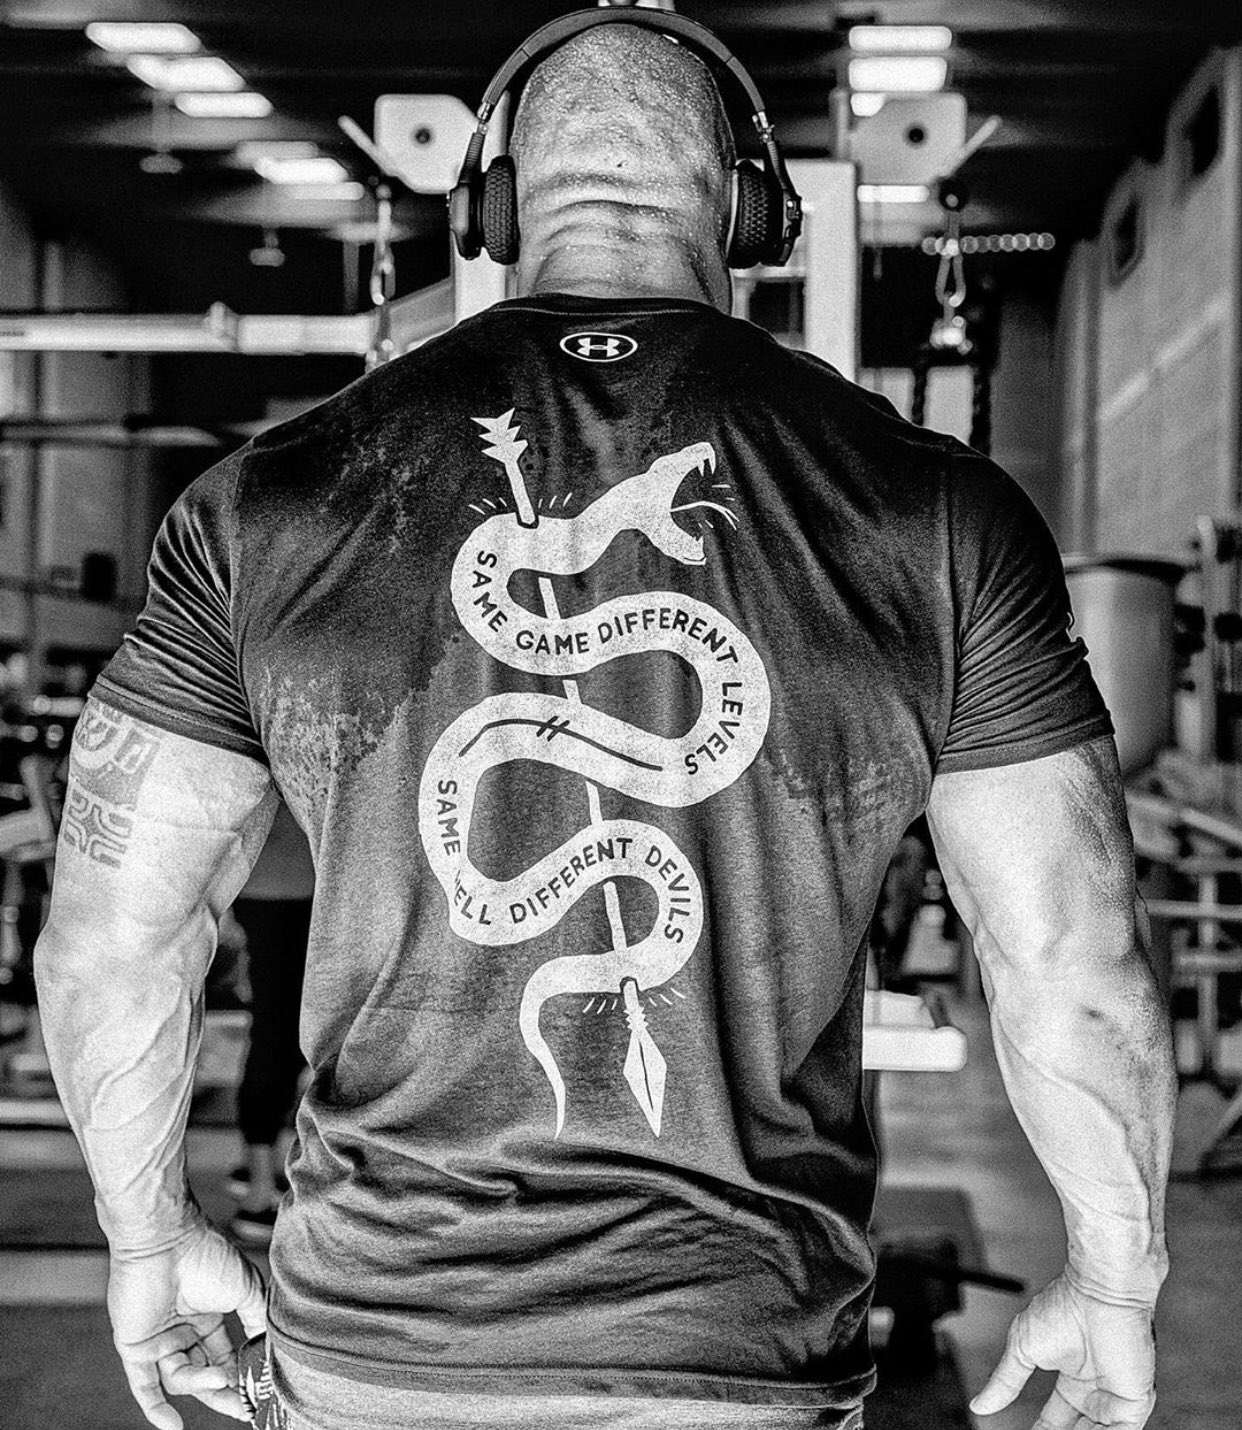 Uživatel Gökhan Saki na Twitteru: when i'm walking in after my training thinking I'm rocking the new @TheRock project underarmour with smolder intensity 💯... I find out i'm